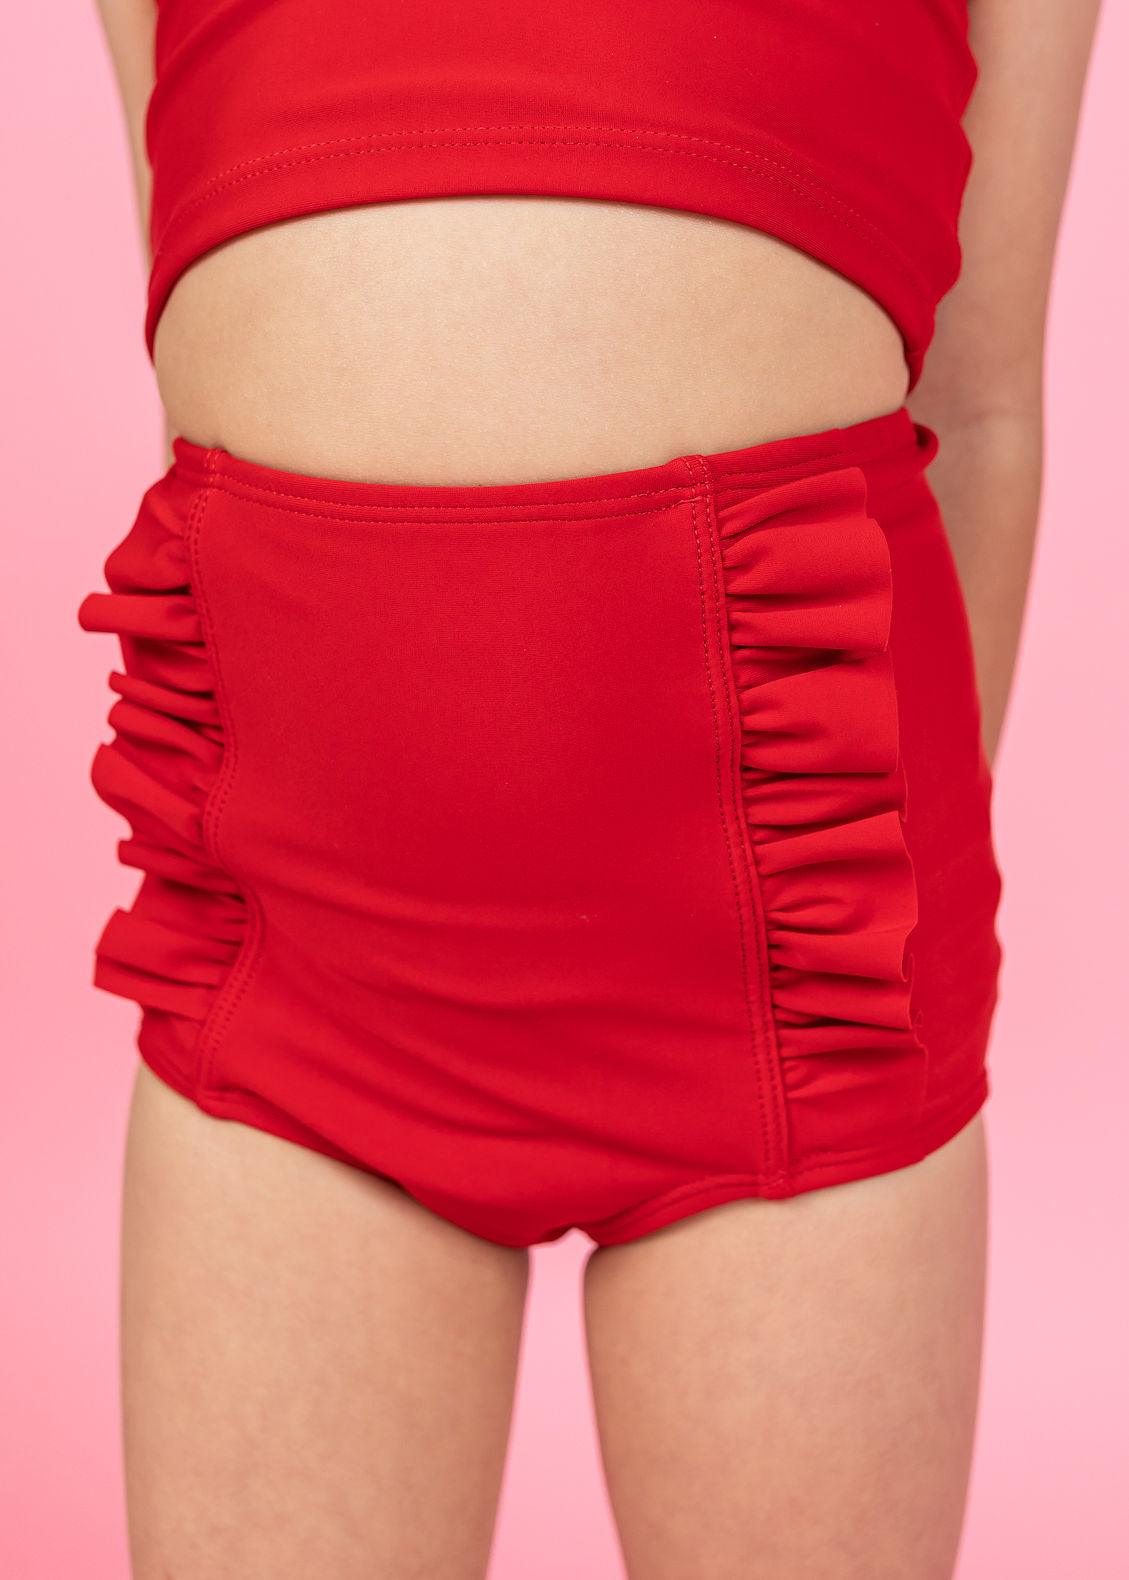 Girls High-Waisted Swimsuit Bottoms - Cherry Red